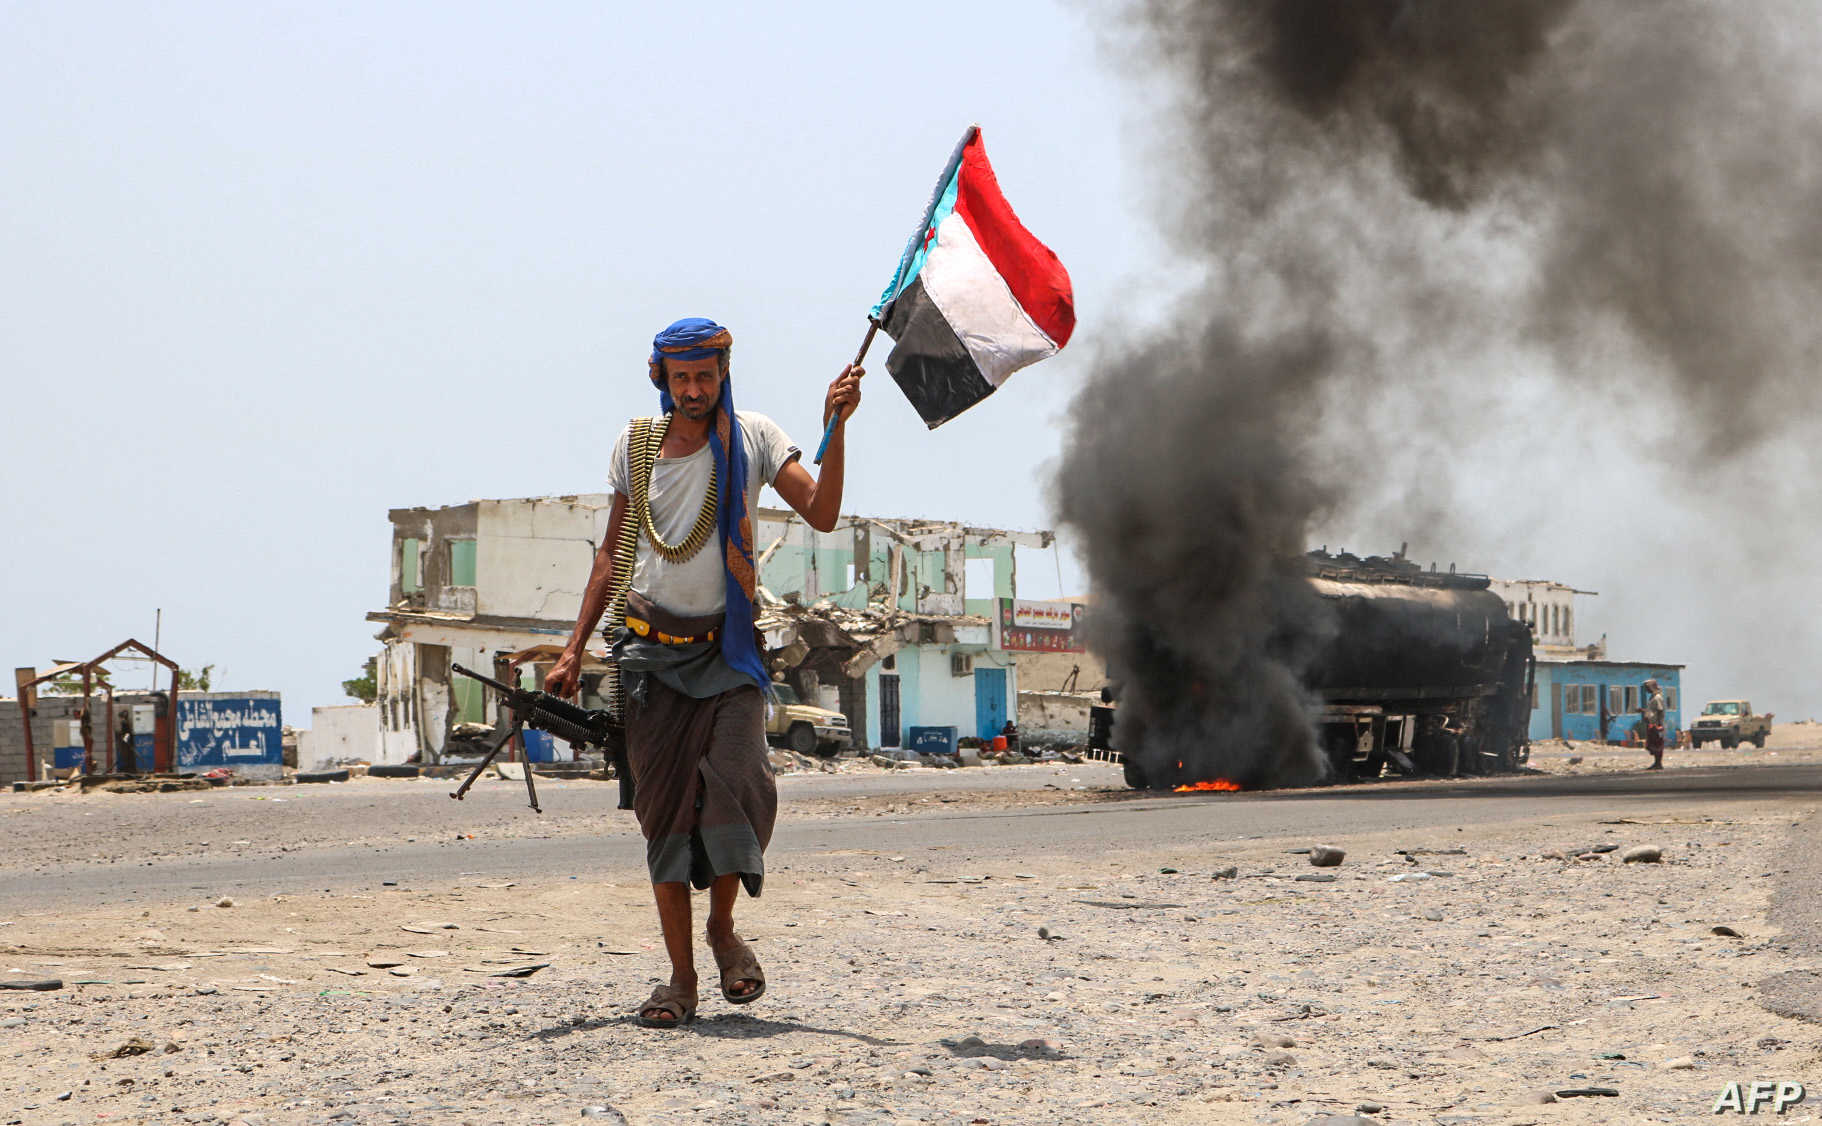 (FILES) In this file photo taken on August 30, 2019 A fighter of the UAE-trained Security Belt Force, dominated by members of the Southern Transitional Council (STC) which seeks independence for south Yemen, walks with a separatist flag past an oil tanker set ablaze during clashes between the separatists and the Saudi-backed government forces at the Fayush-Alam crossroads on the eastern entrance Aden from the Abyan province in southern Yemen. - The Saudi-led coalition backing the Yemeni government against Huthi rebels in Yemen's conflict announced on March 29 a halt to military operations during the Islamic fasting month of Ramadan from Wednesday morning. (Photo by Nabil HASAN / AFP)